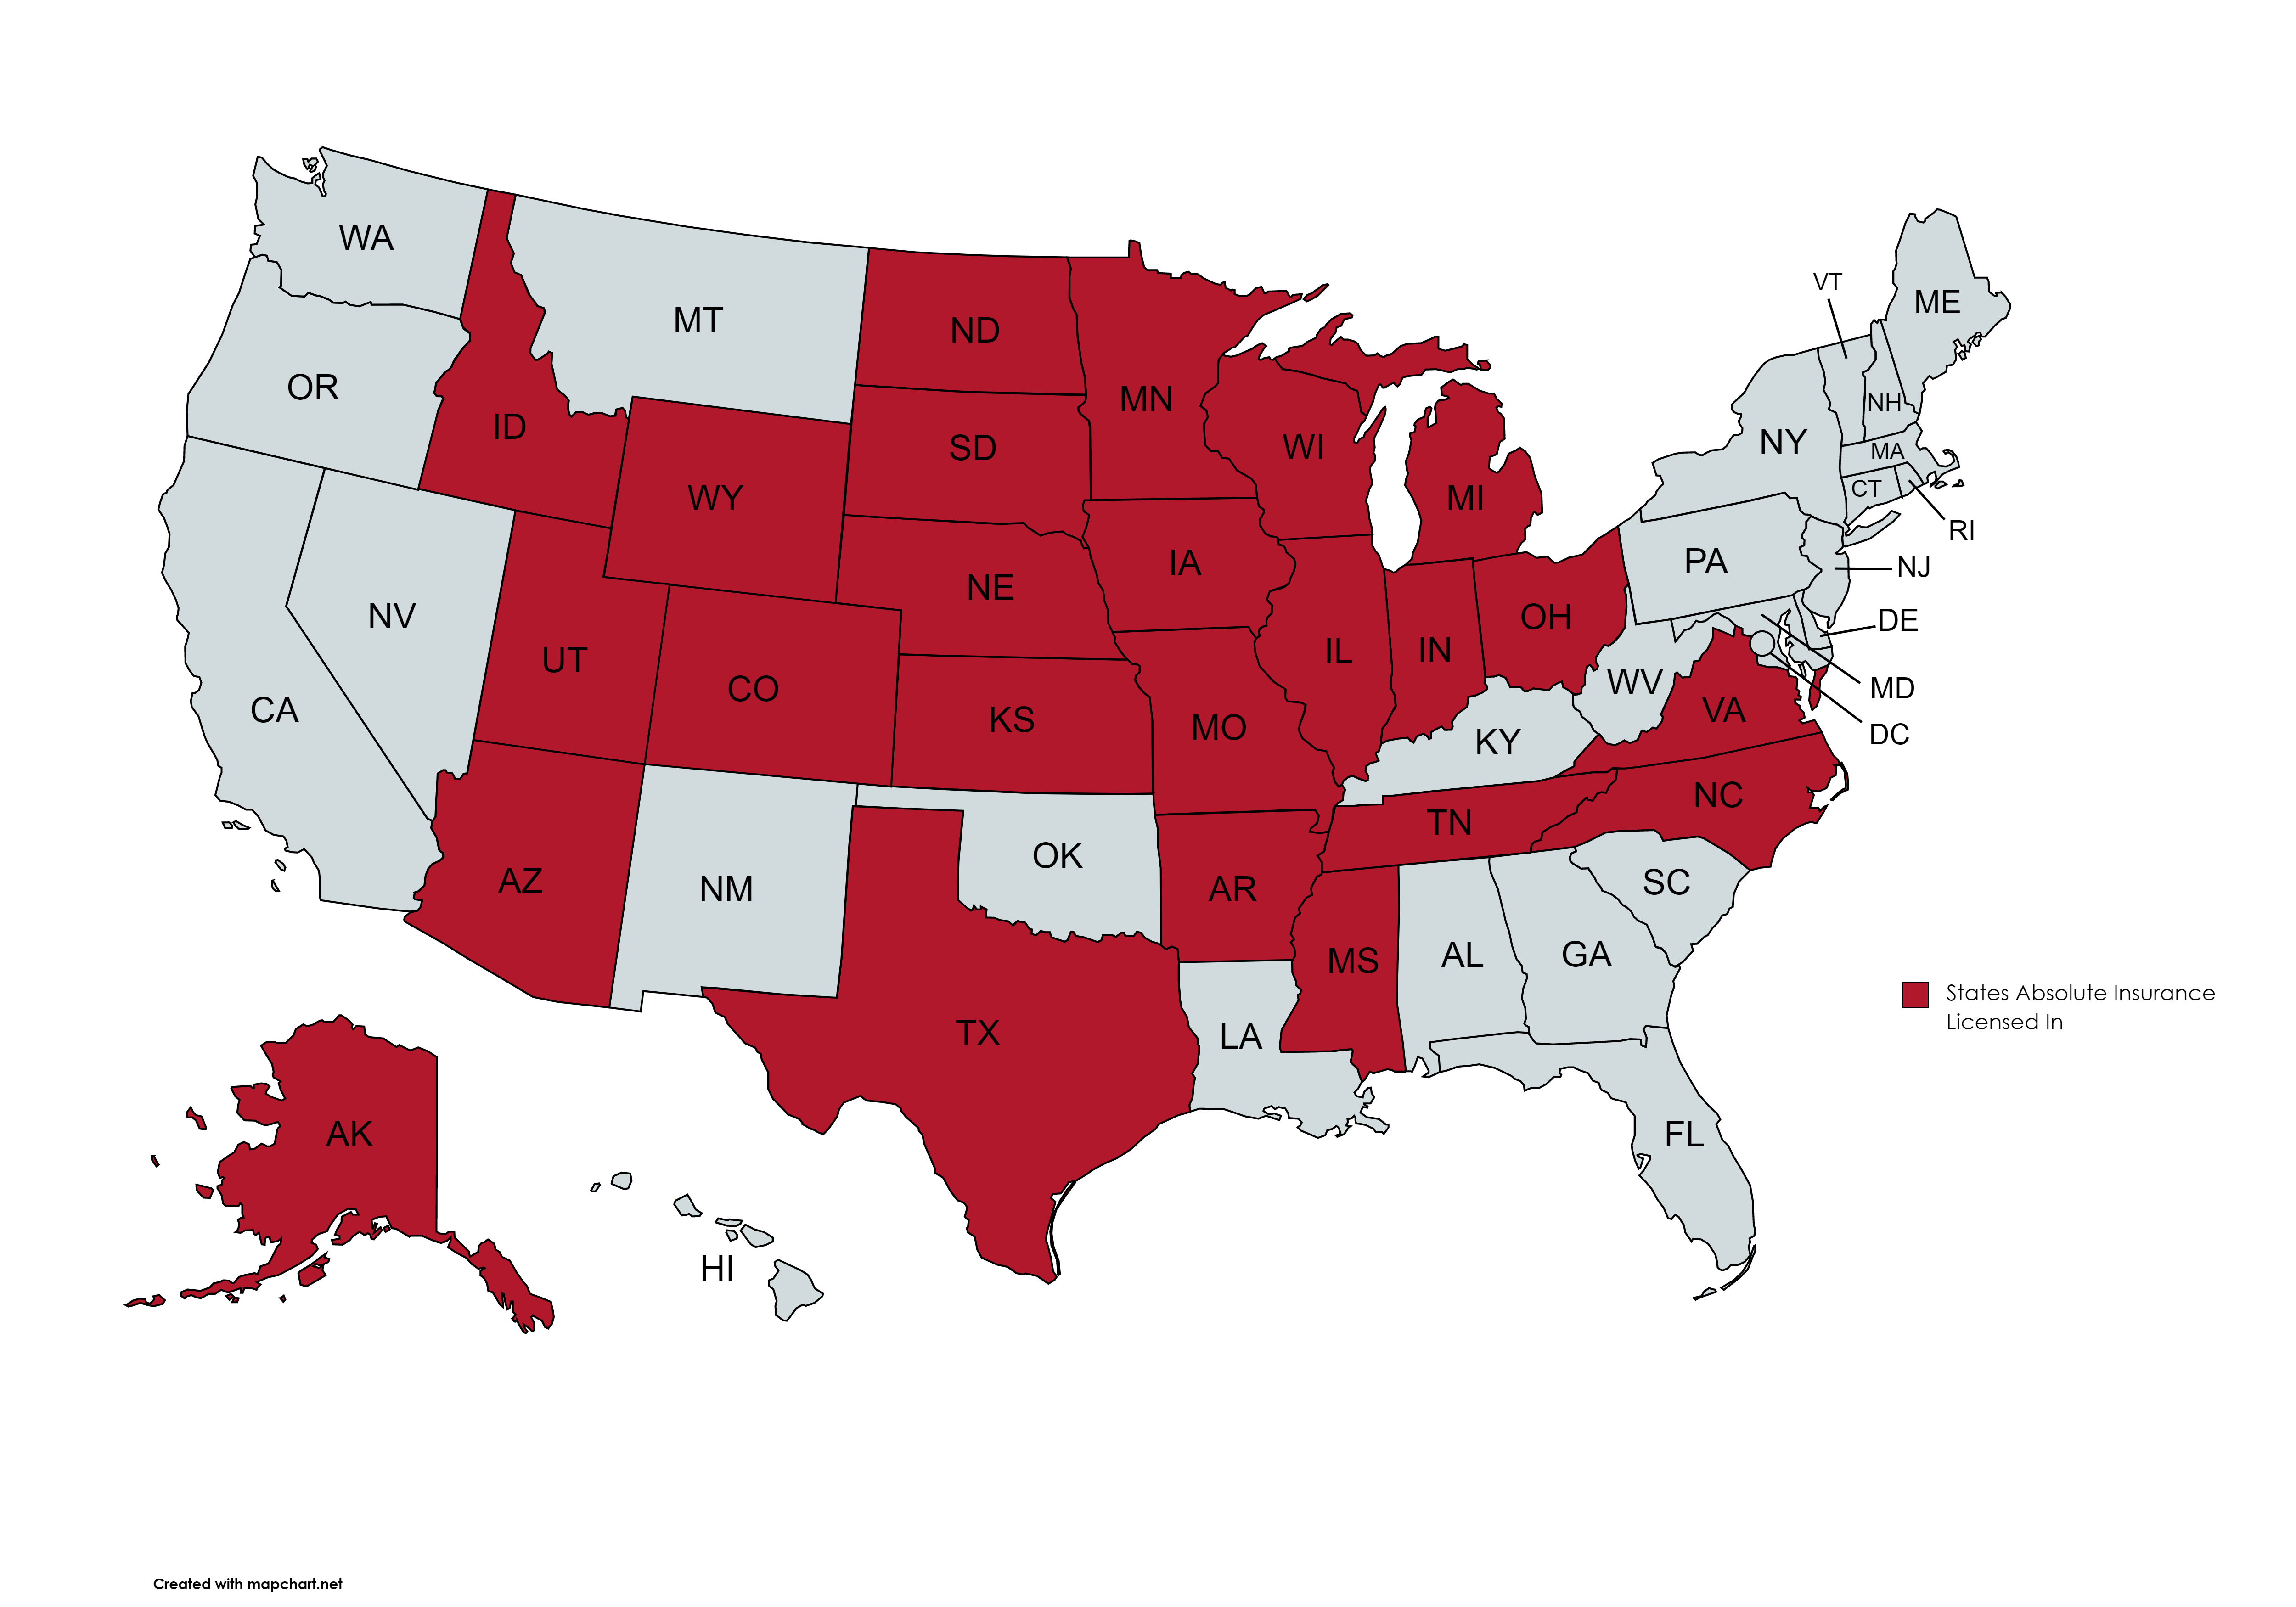 Map showing 24 states Absolute Insurance is licensed in